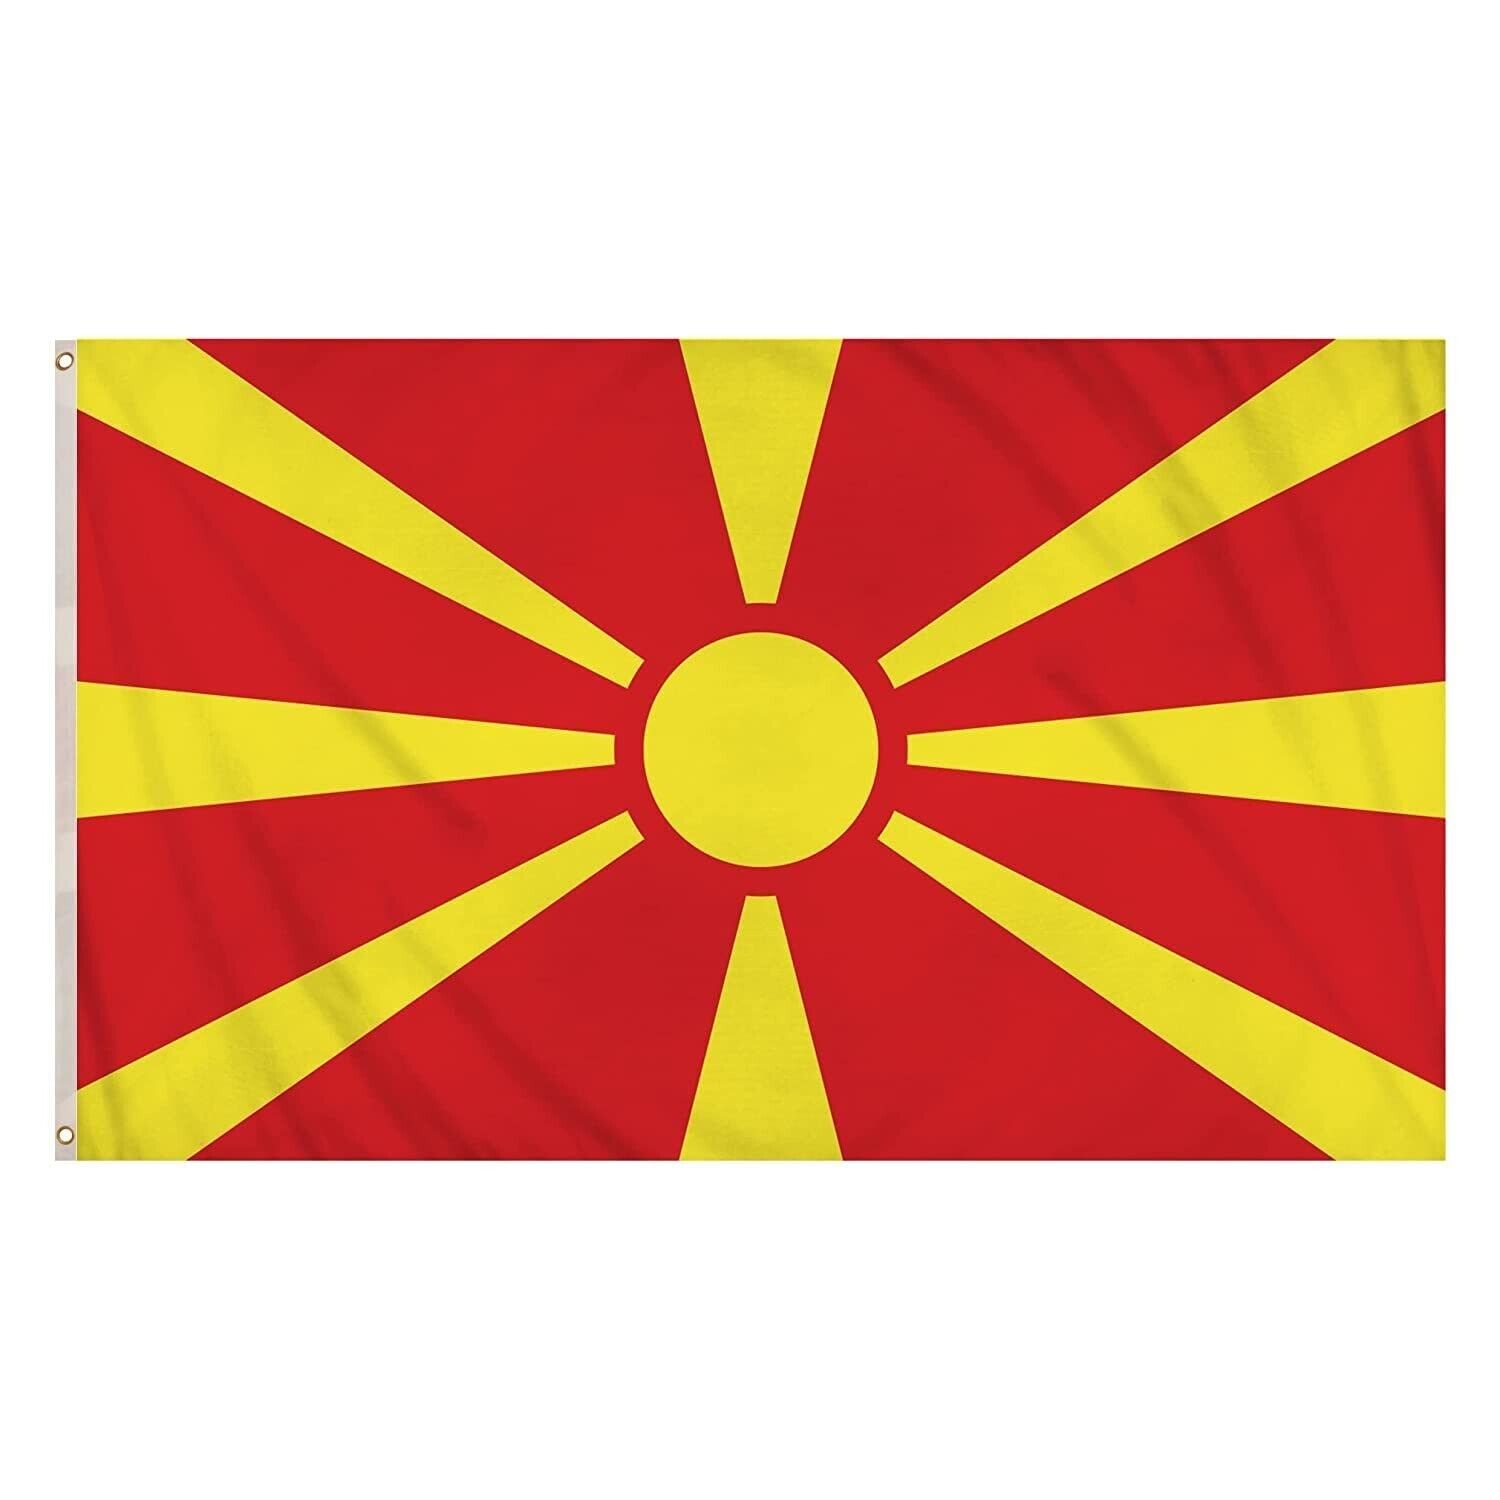 LARGE FLAG NORTH MACEDONIA 5FT X 3FT NATIONAL COLOUR BANNER WITH BRASS EYELETS